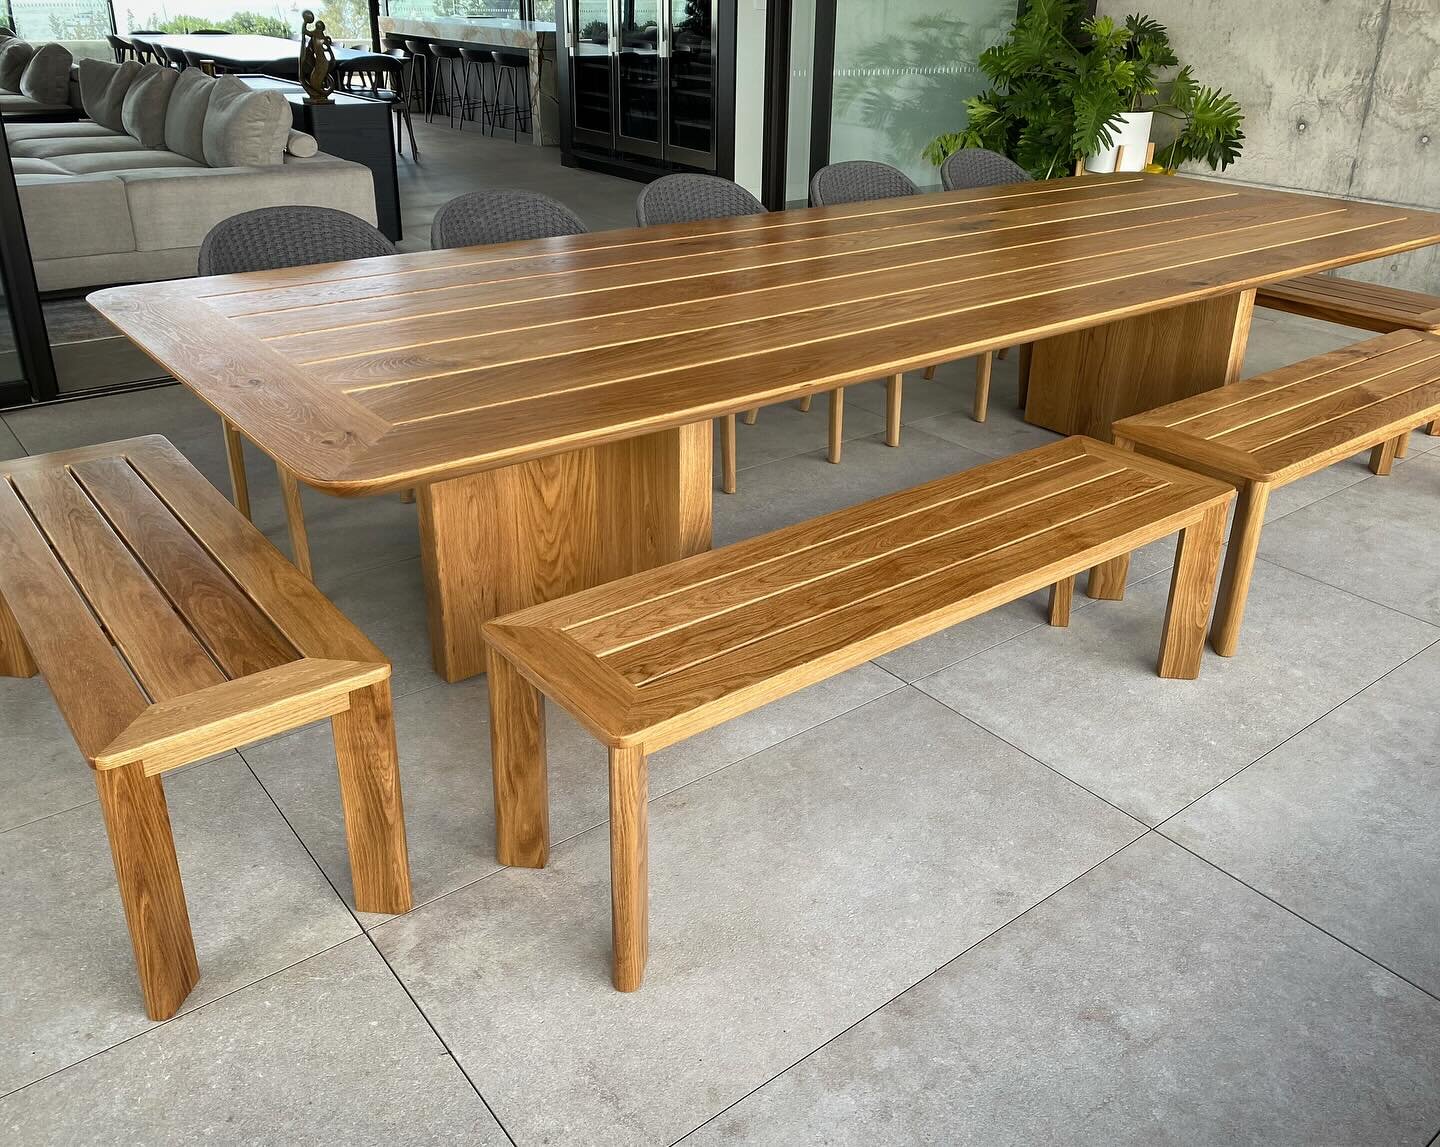 Wrapping up the year with a beauty. Bespoke Outdoor Dining Table and matching Bench Seats in stunning American Oak timber. Quite a lot of planning went into this one to ensure she maintains her beauty, whilst up against the elements. Just in time to 